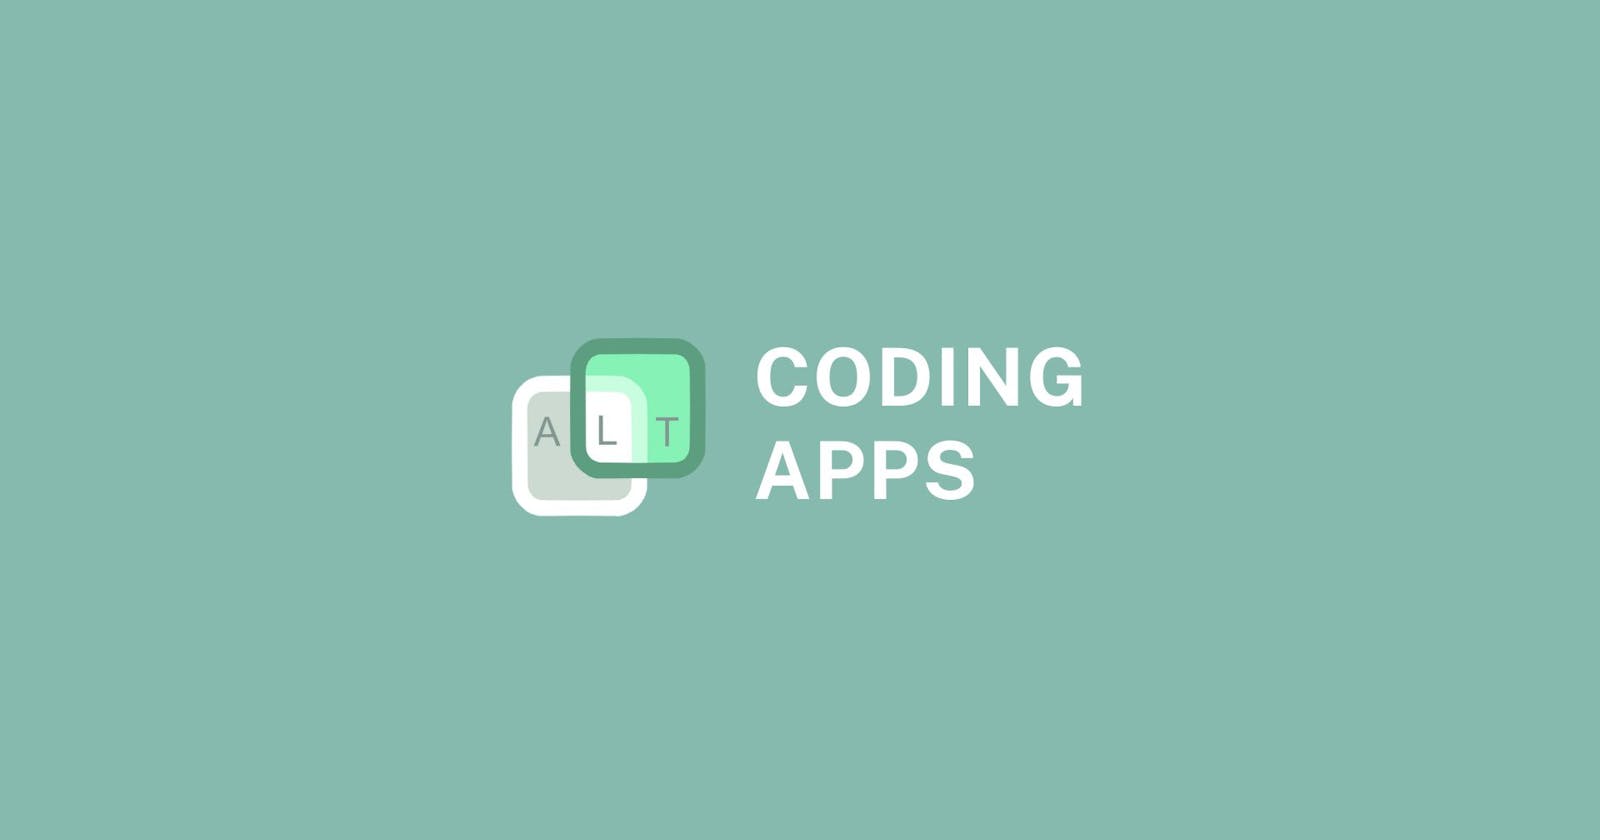 Unleash Your Coding Wizardry with Appslikethese